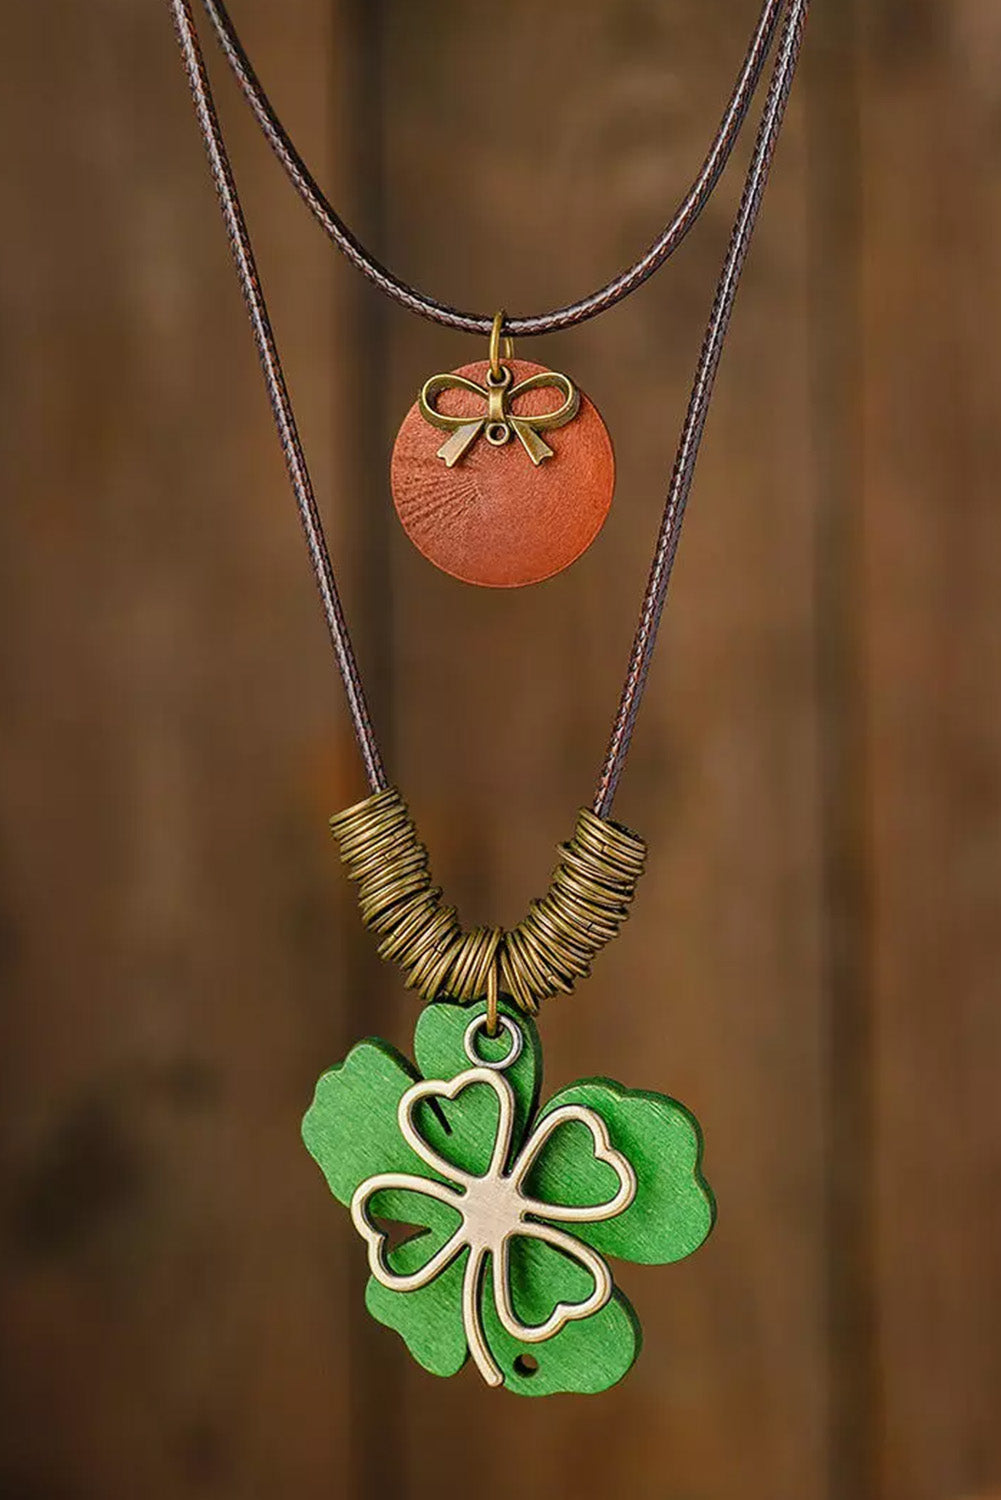 BH011705-9, Green St Patricks Day Clover Necklace Copper Ring Decor Accessories